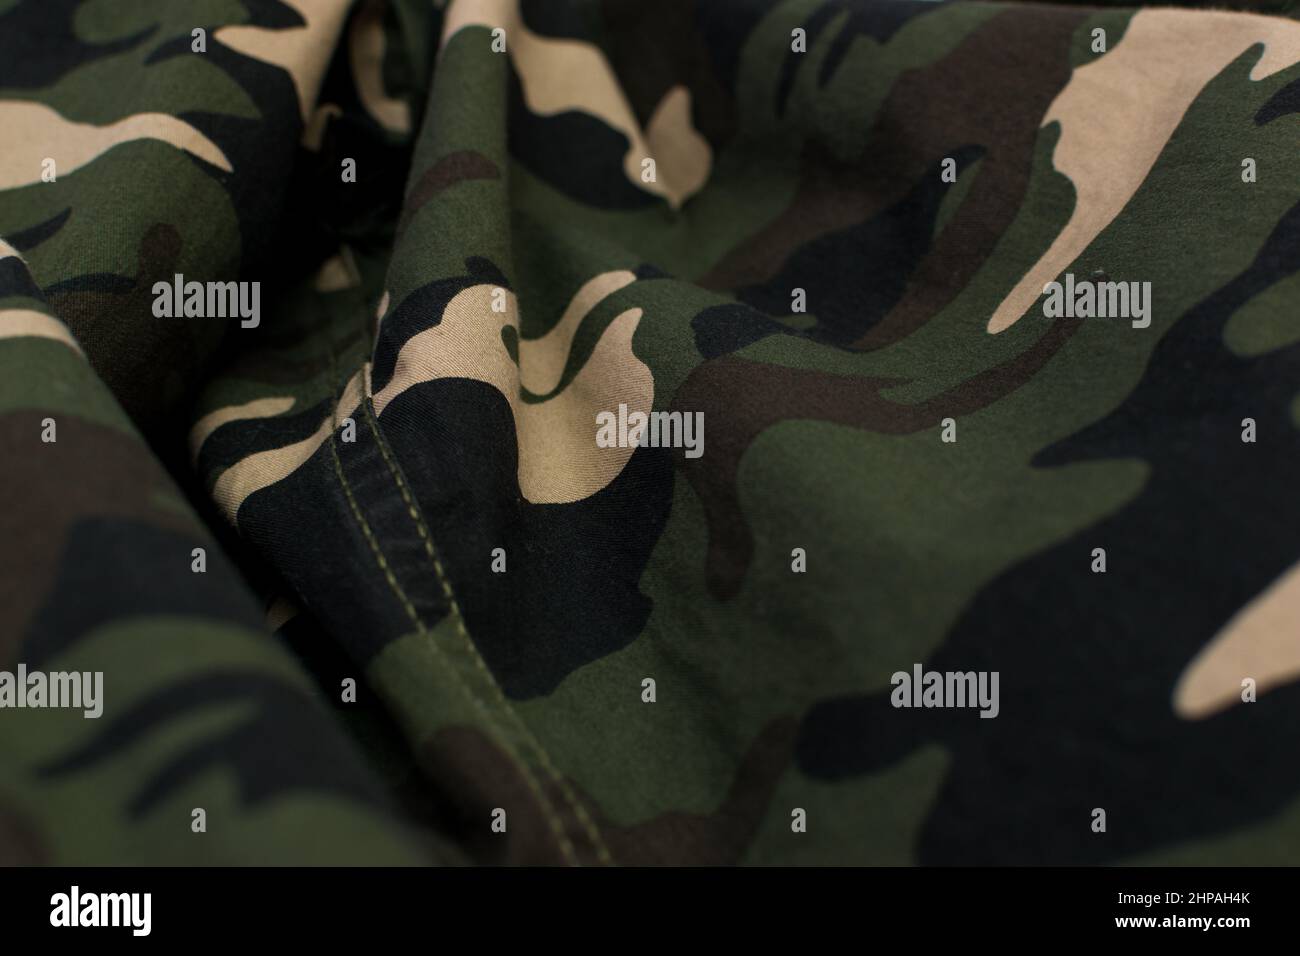 Military camouflage green, black, brown and beige uniform, background, close up Stock Photo